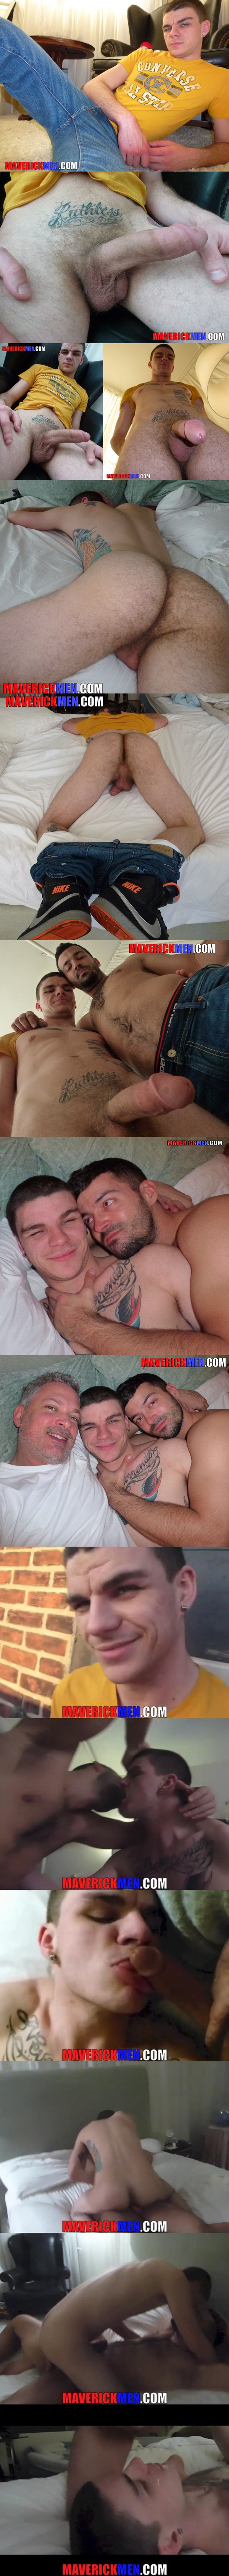 Horse-hung jock boy Joey gets his cherry popped up bareback with cum facial in Just The Tip Dude at Maverickmen 01